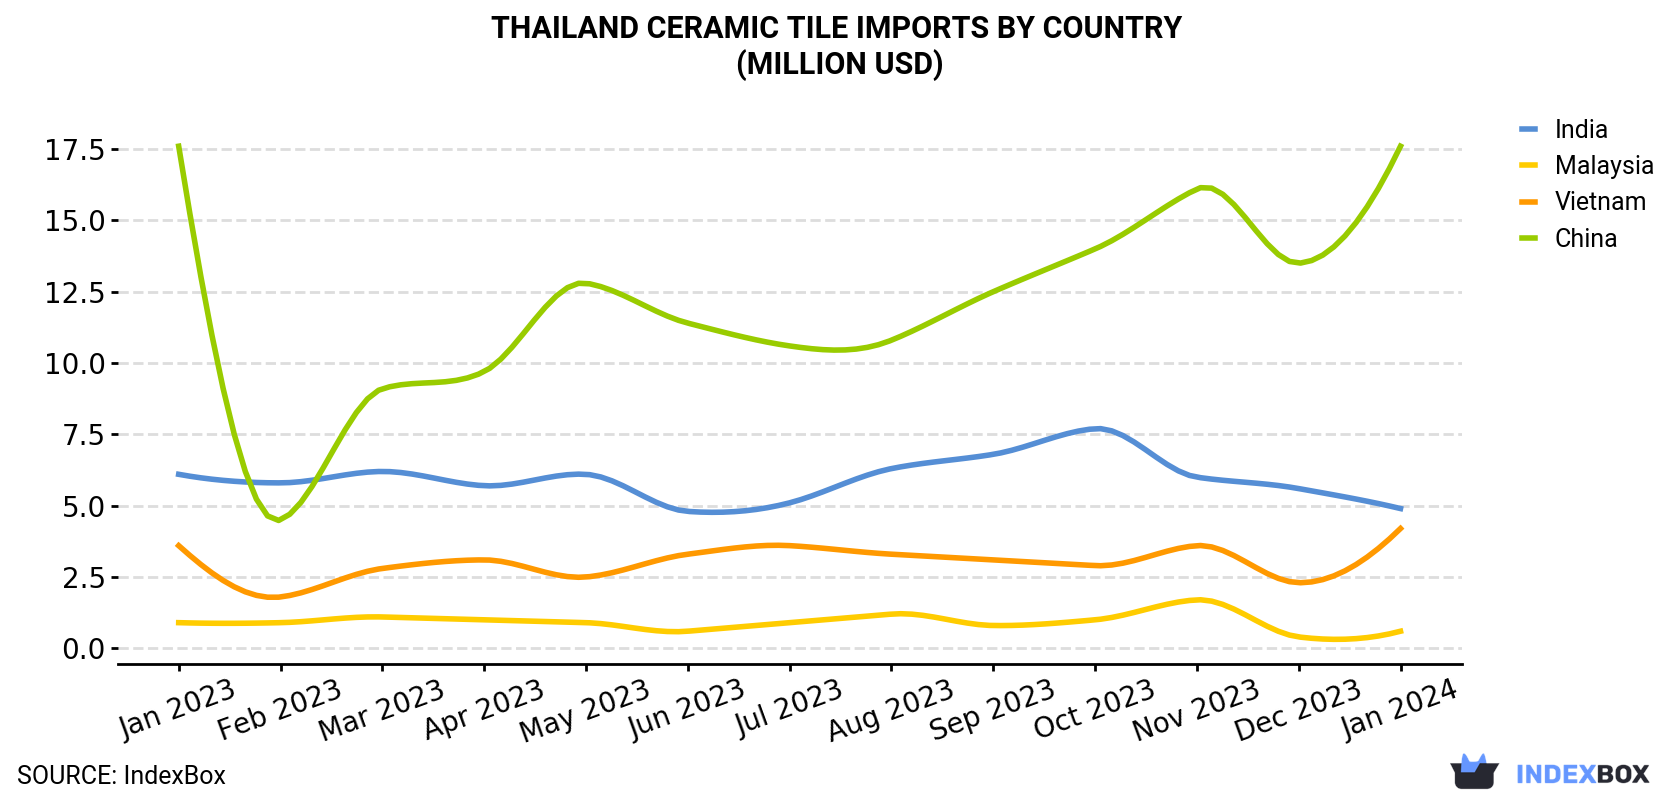 Thailand Ceramic Tile Imports By Country (Million USD)